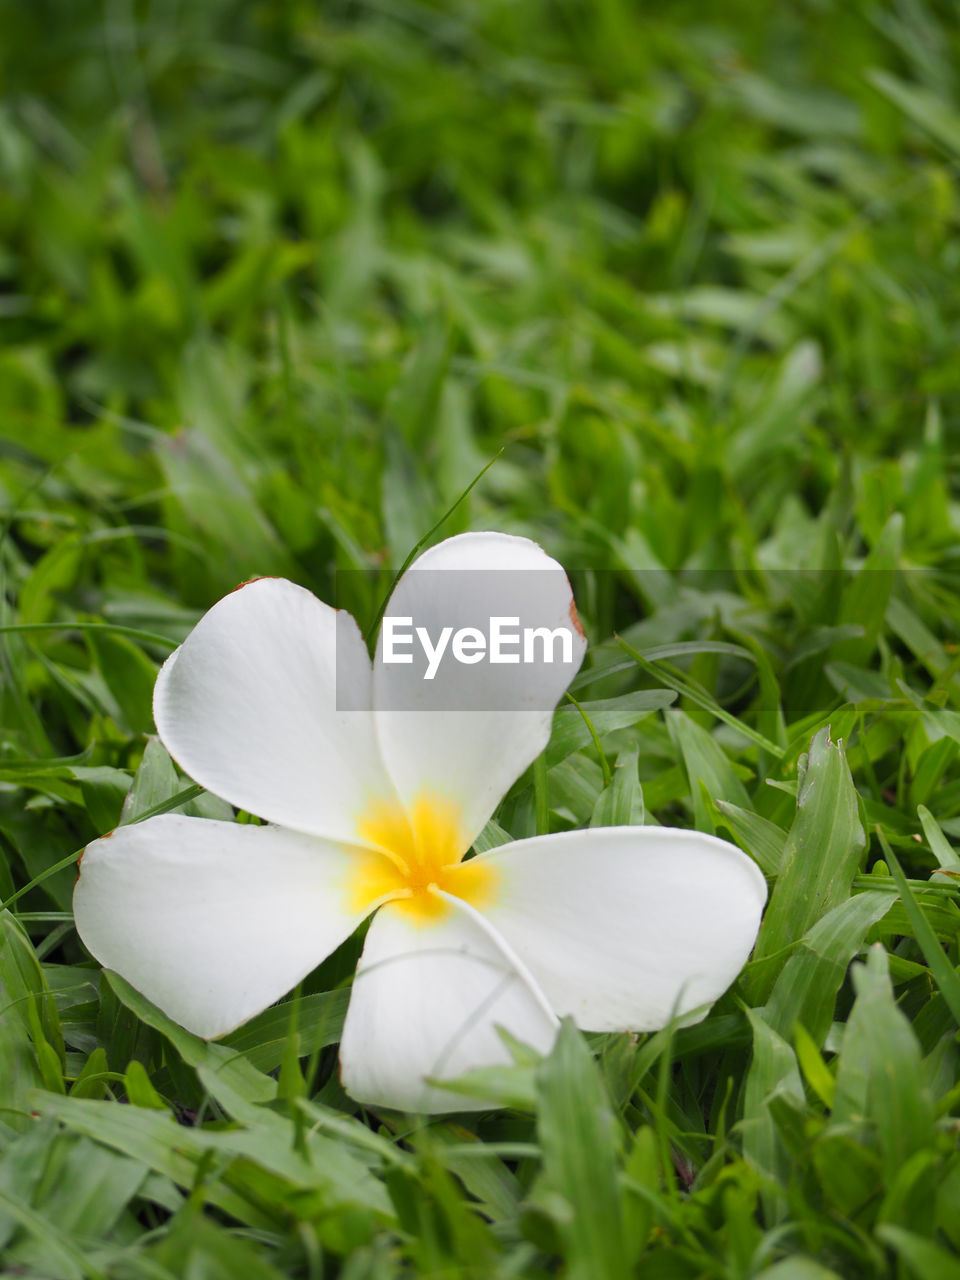 CLOSE-UP OF FRANGIPANI BLOOMING IN FIELD